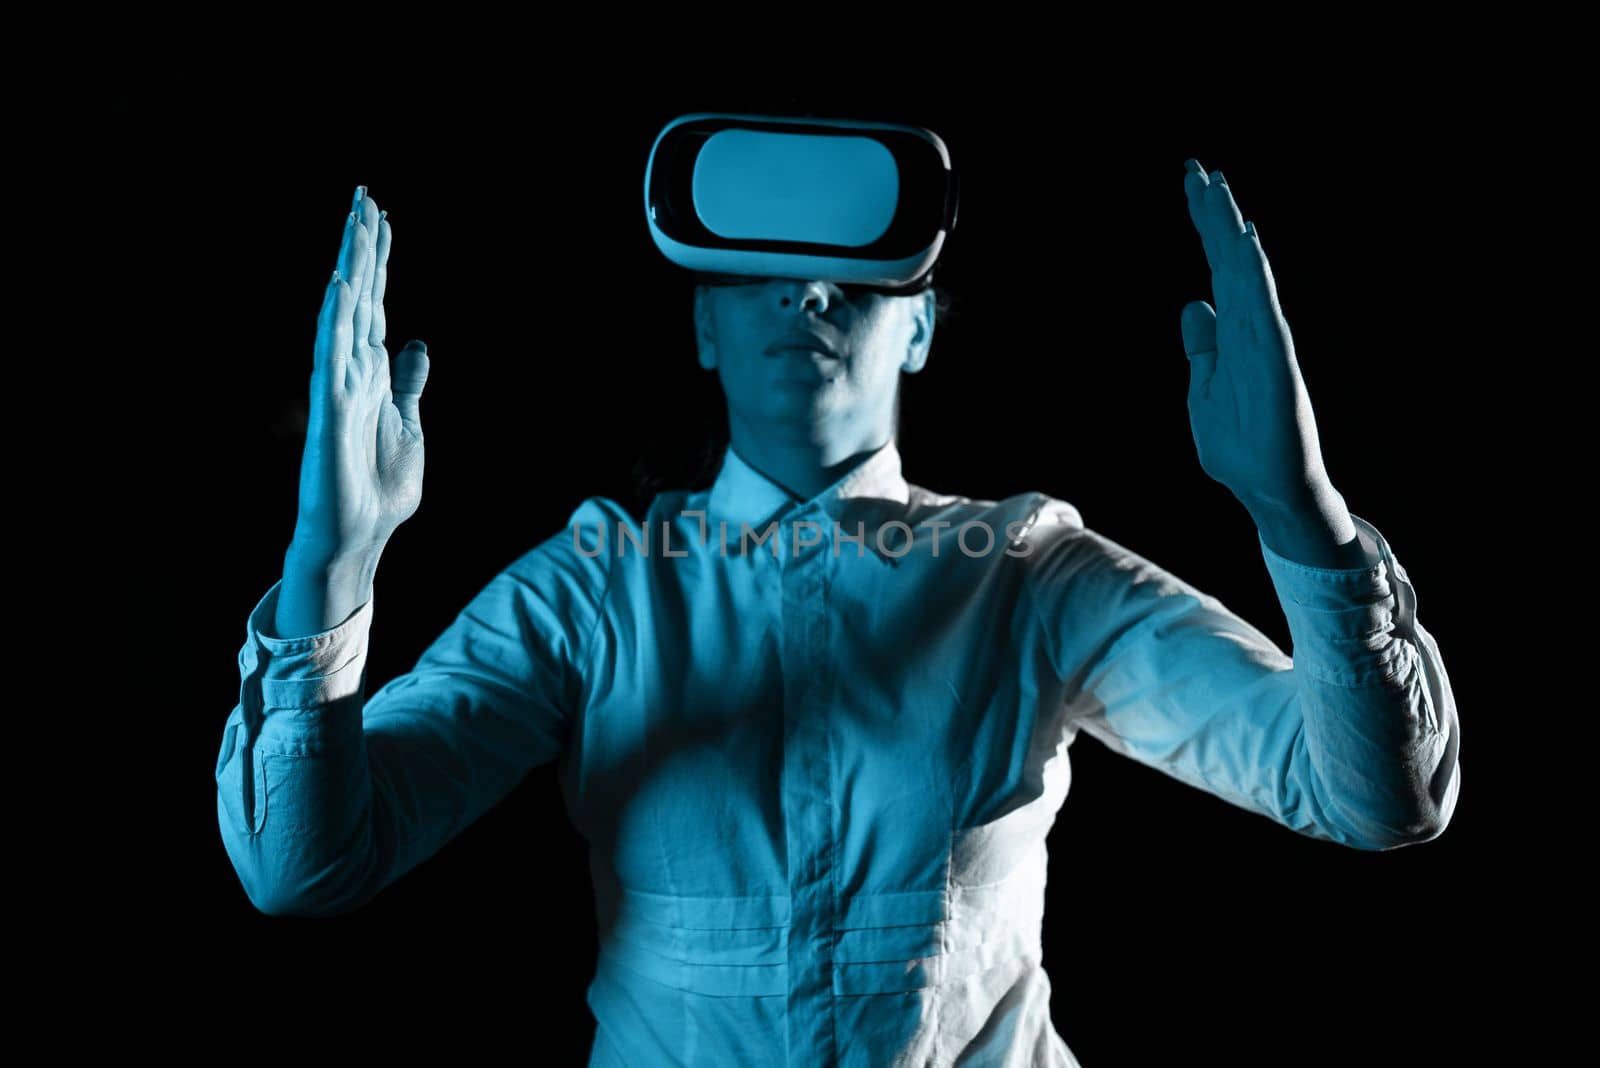 Woman Wearing Vr Glasses And Presenting Important Messages Over Both Hands.